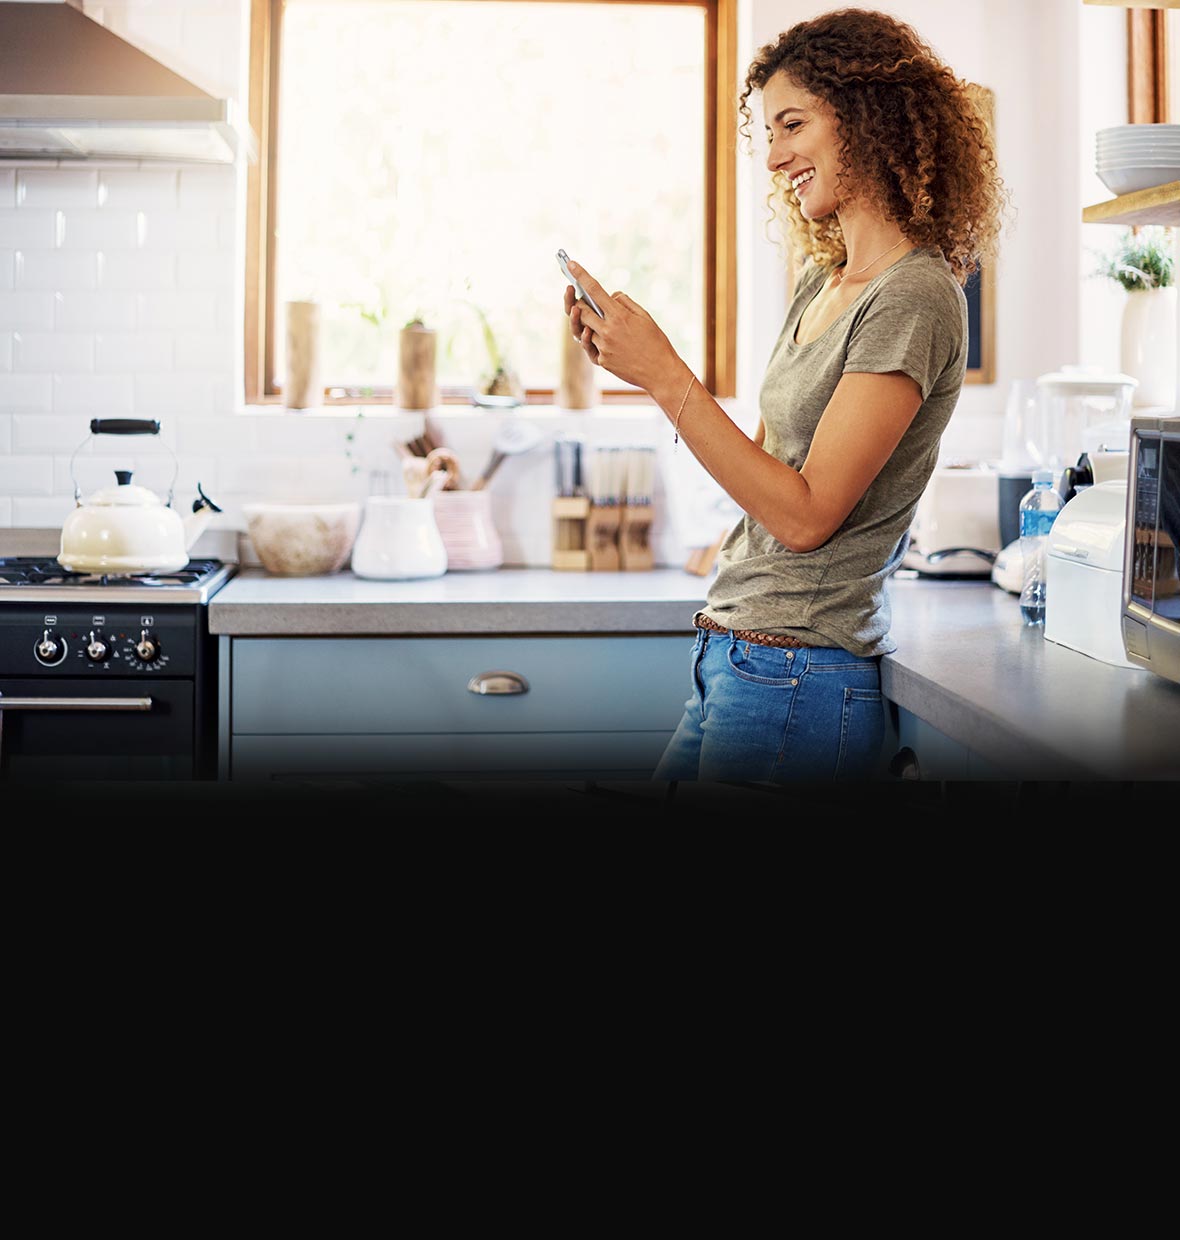 woman on mobile phone in kitchen